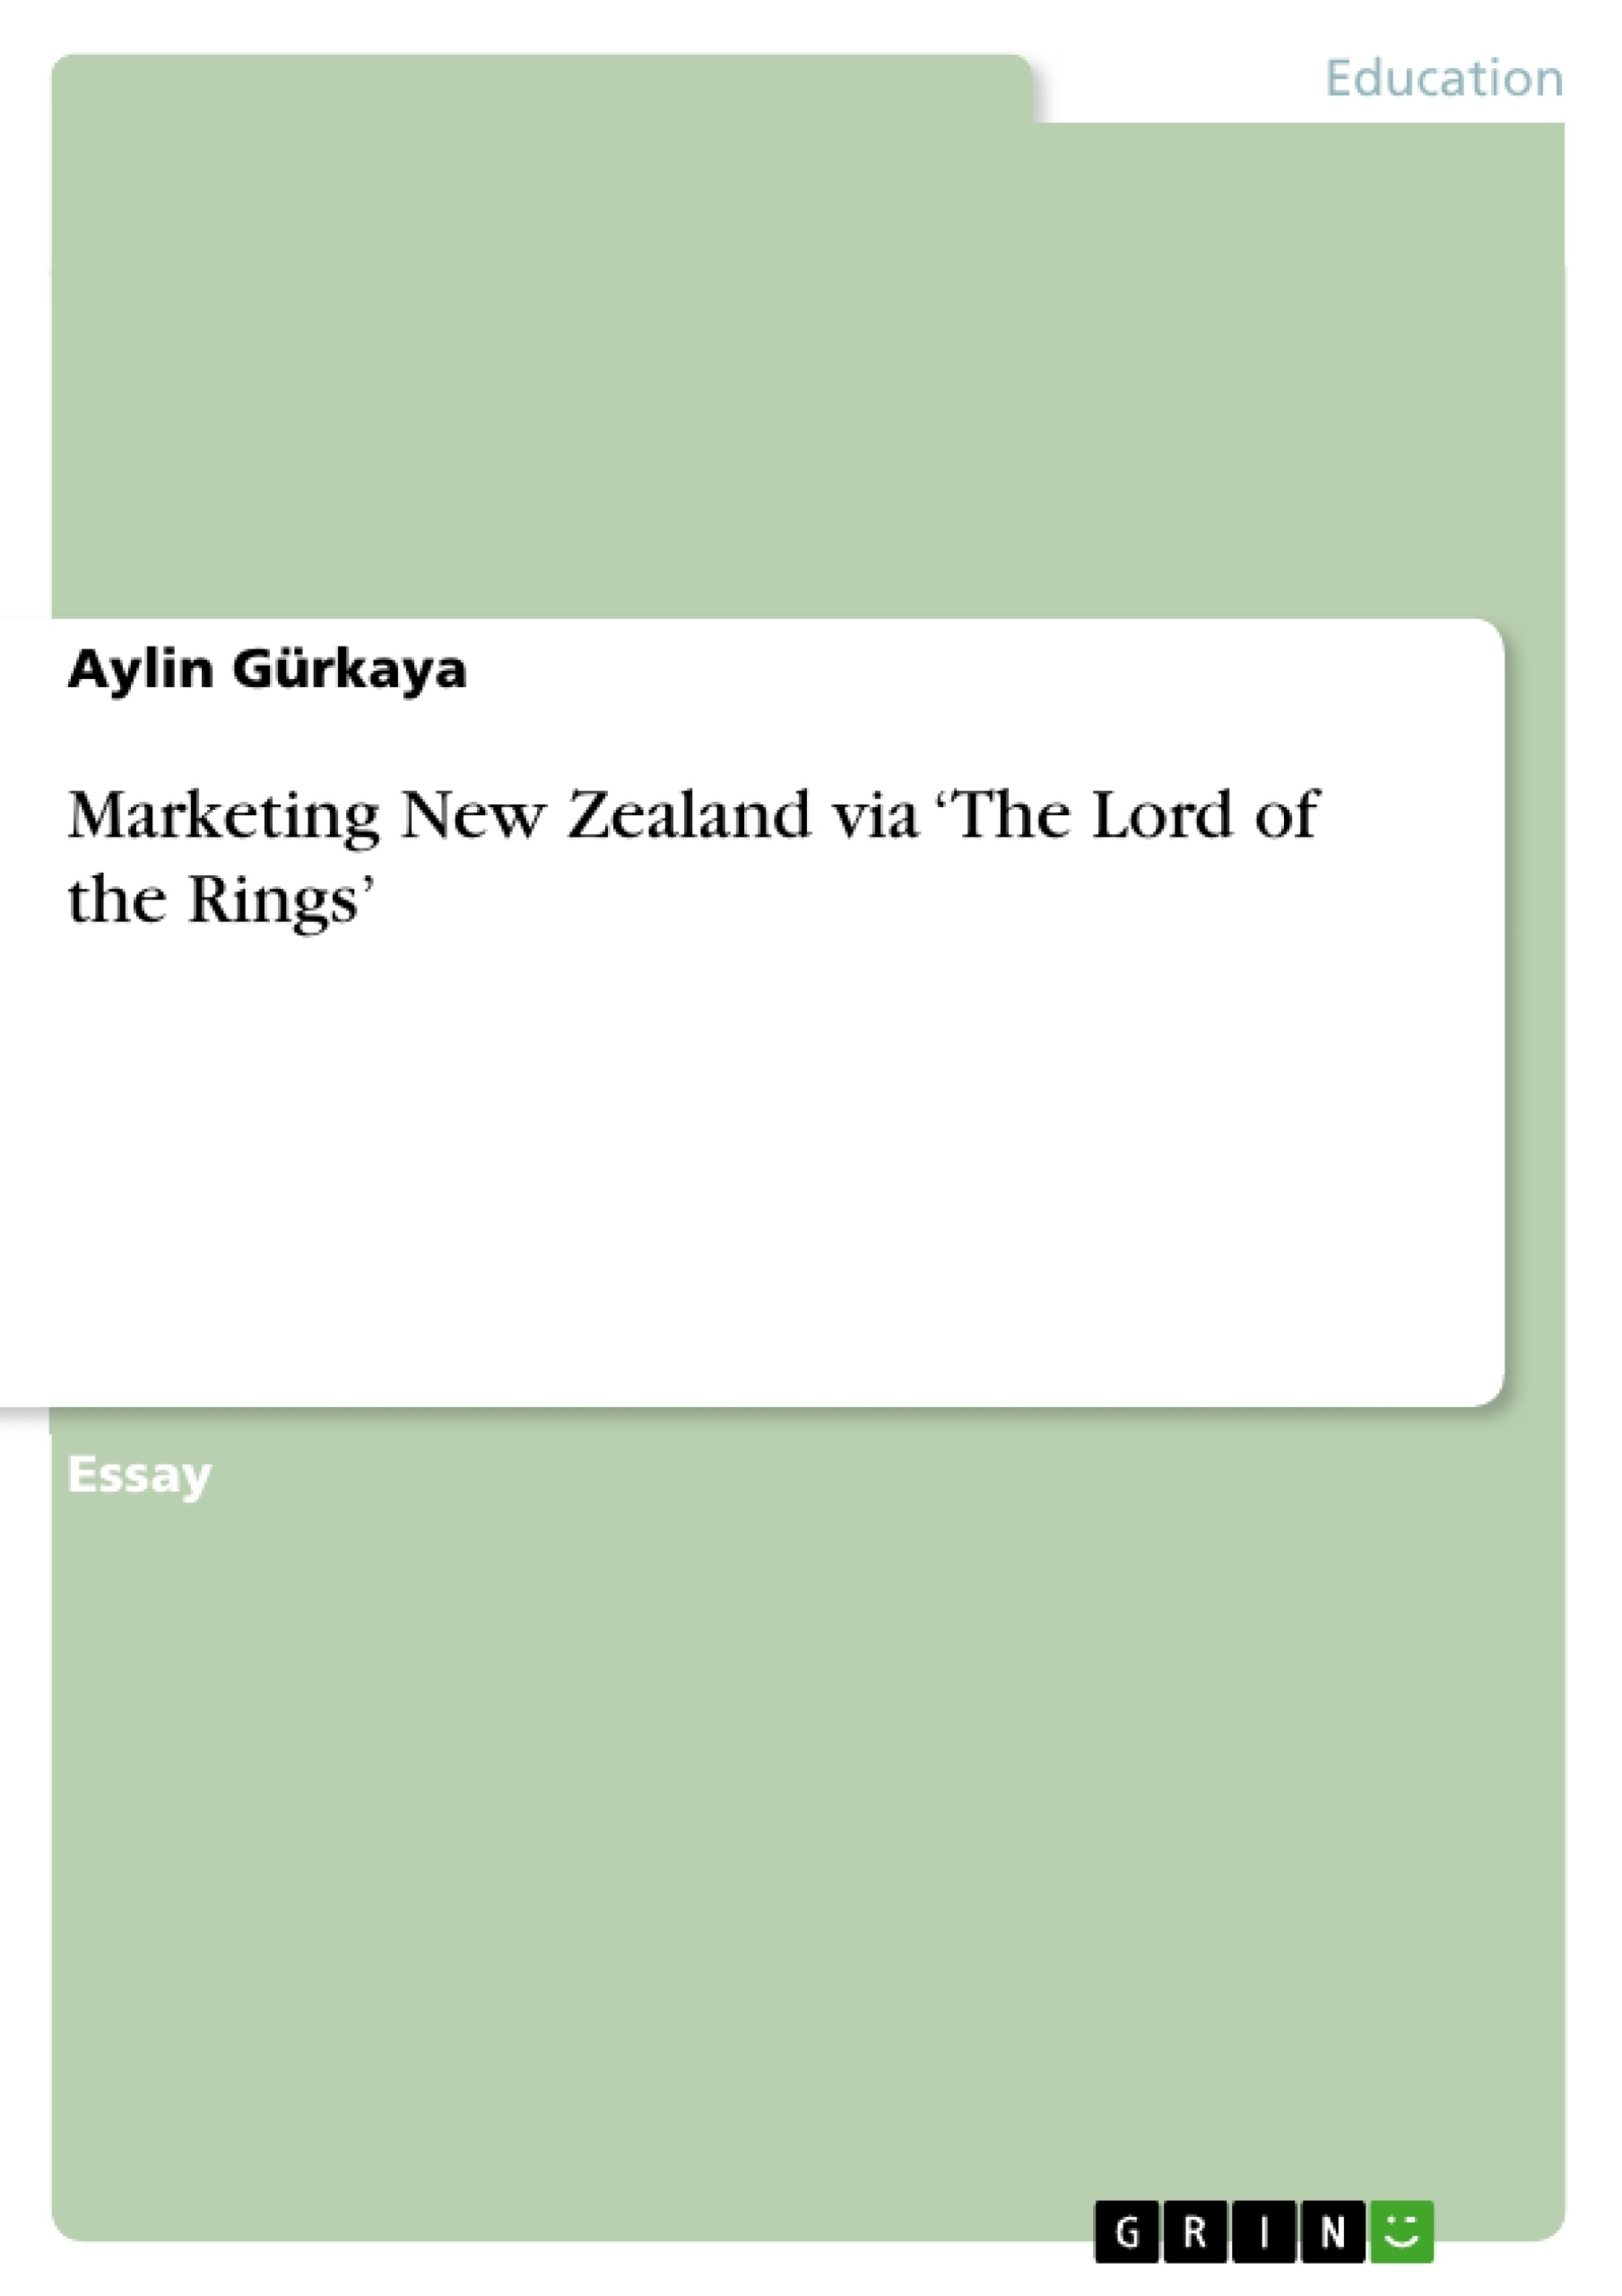 Title: Marketing New Zealand via ‘The Lord of the Rings’